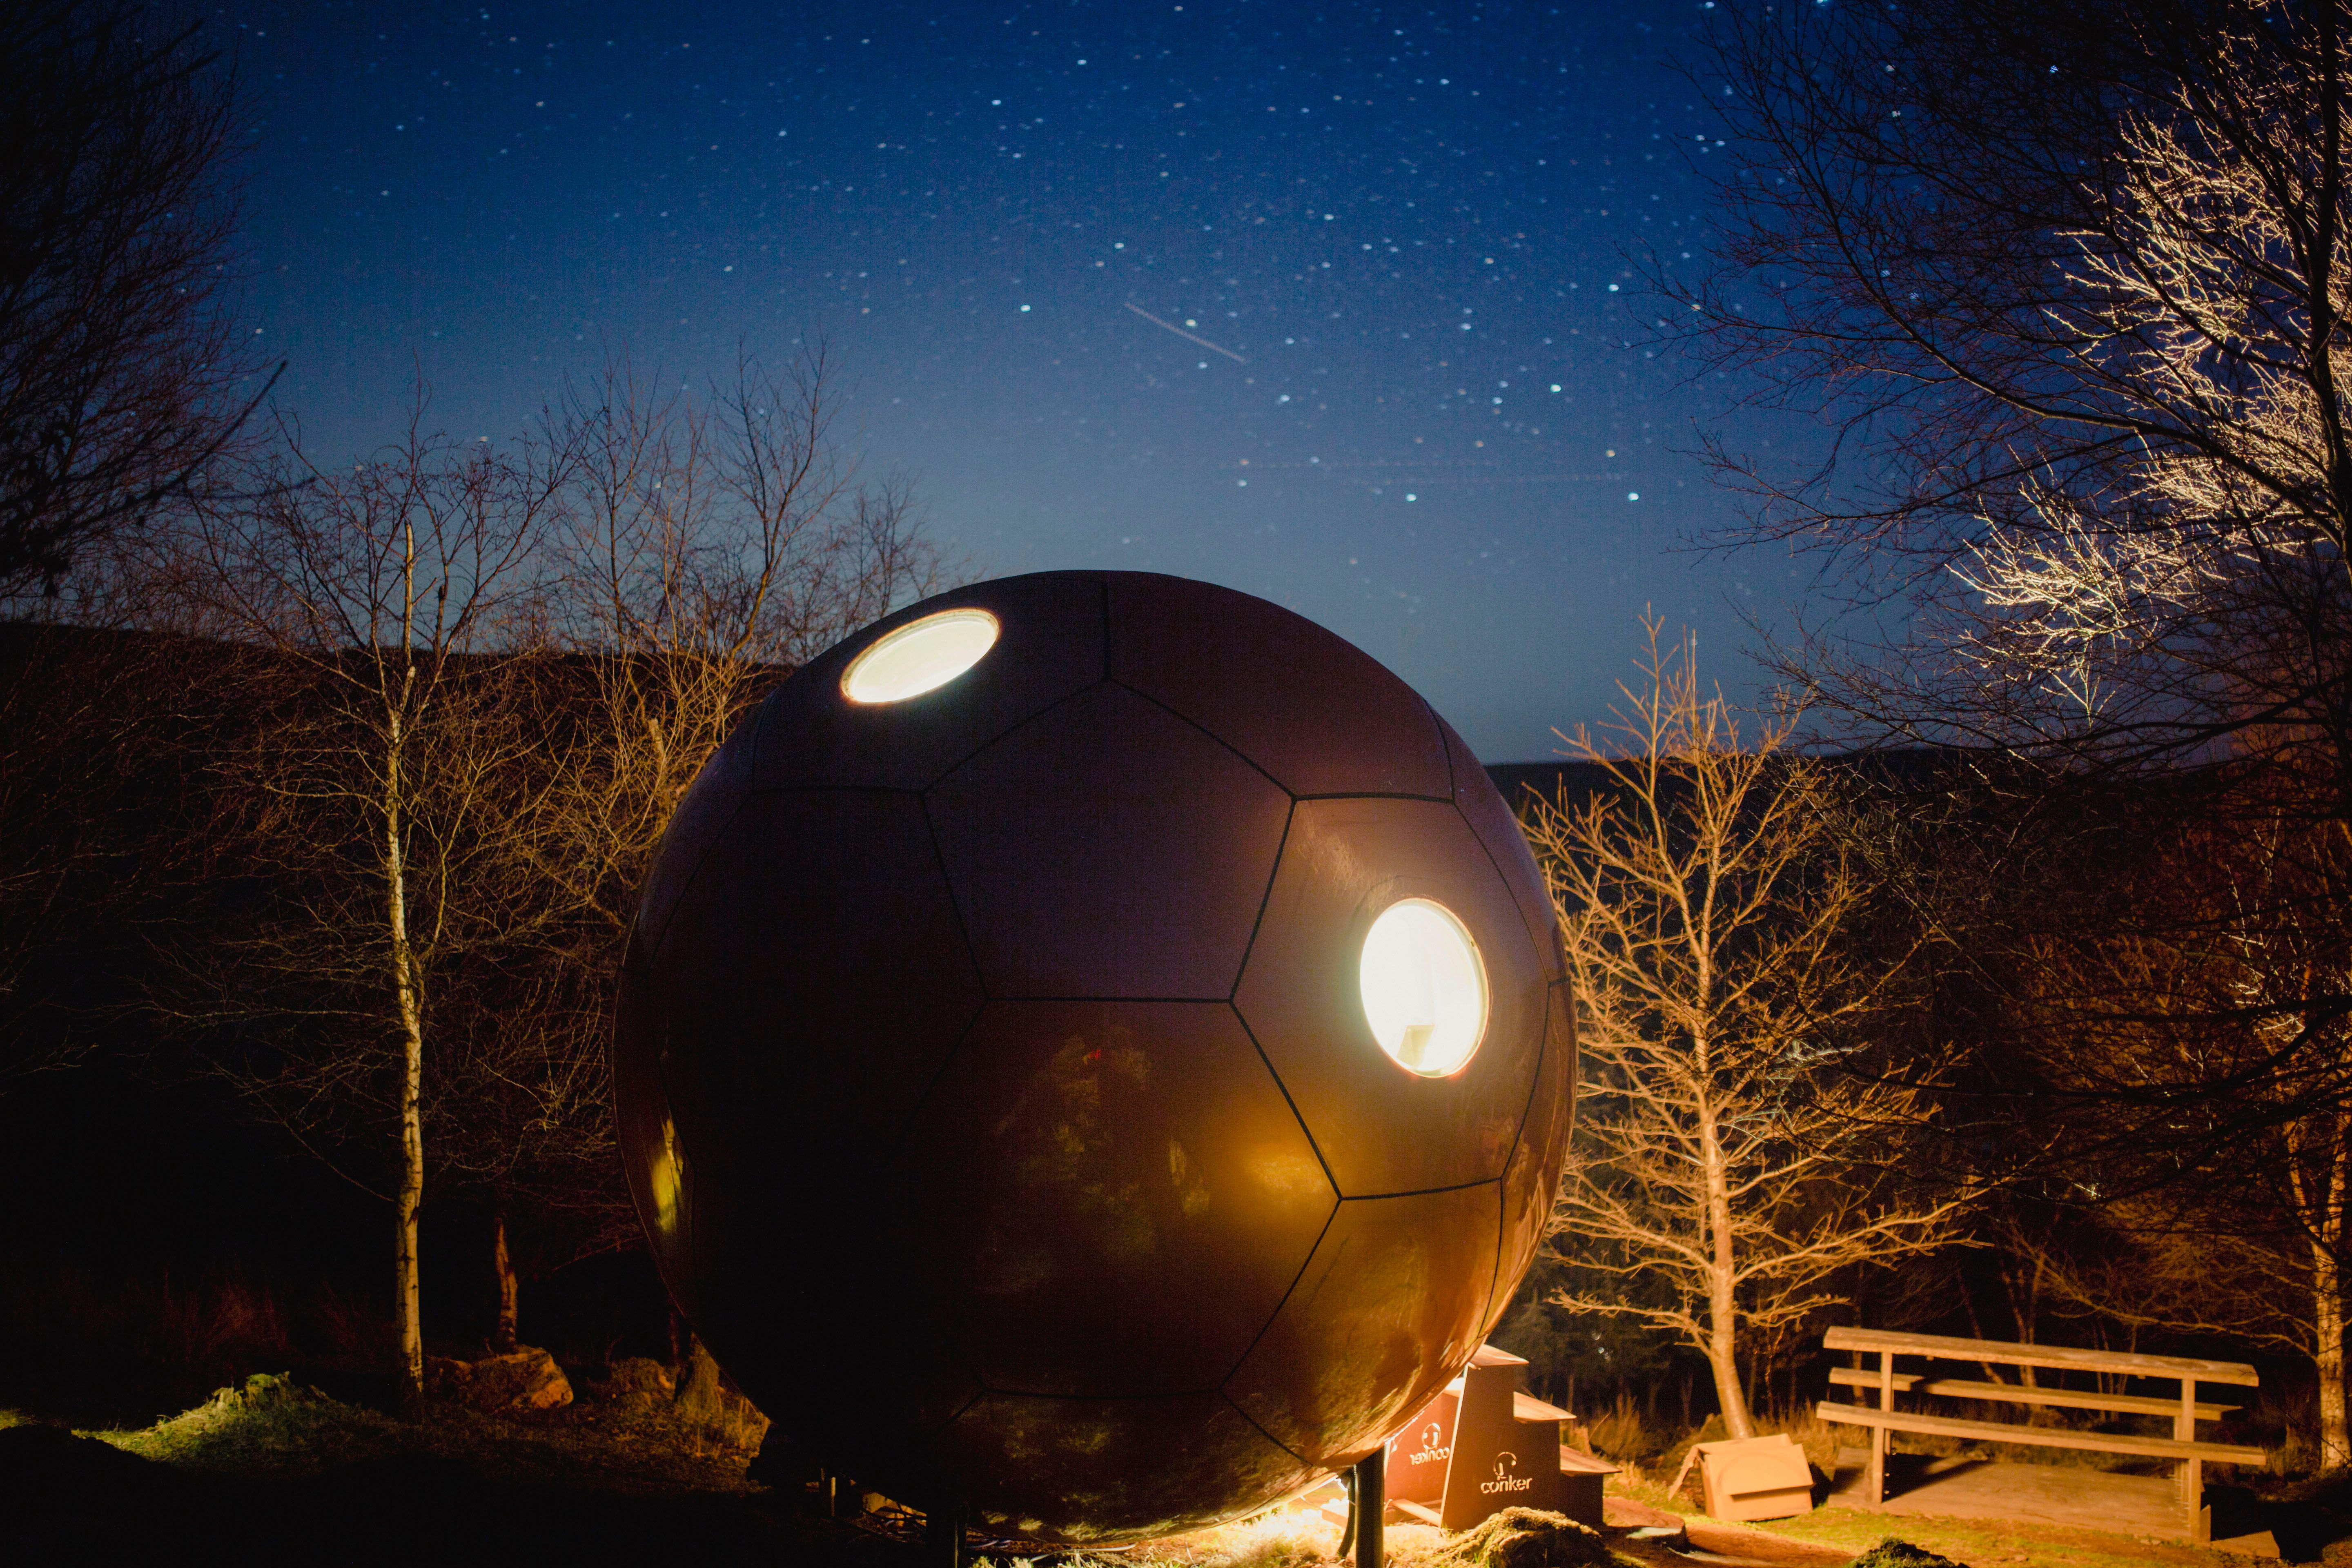 The glamping pod sits in the Cambrian Mountains International Dark Skies Reserve